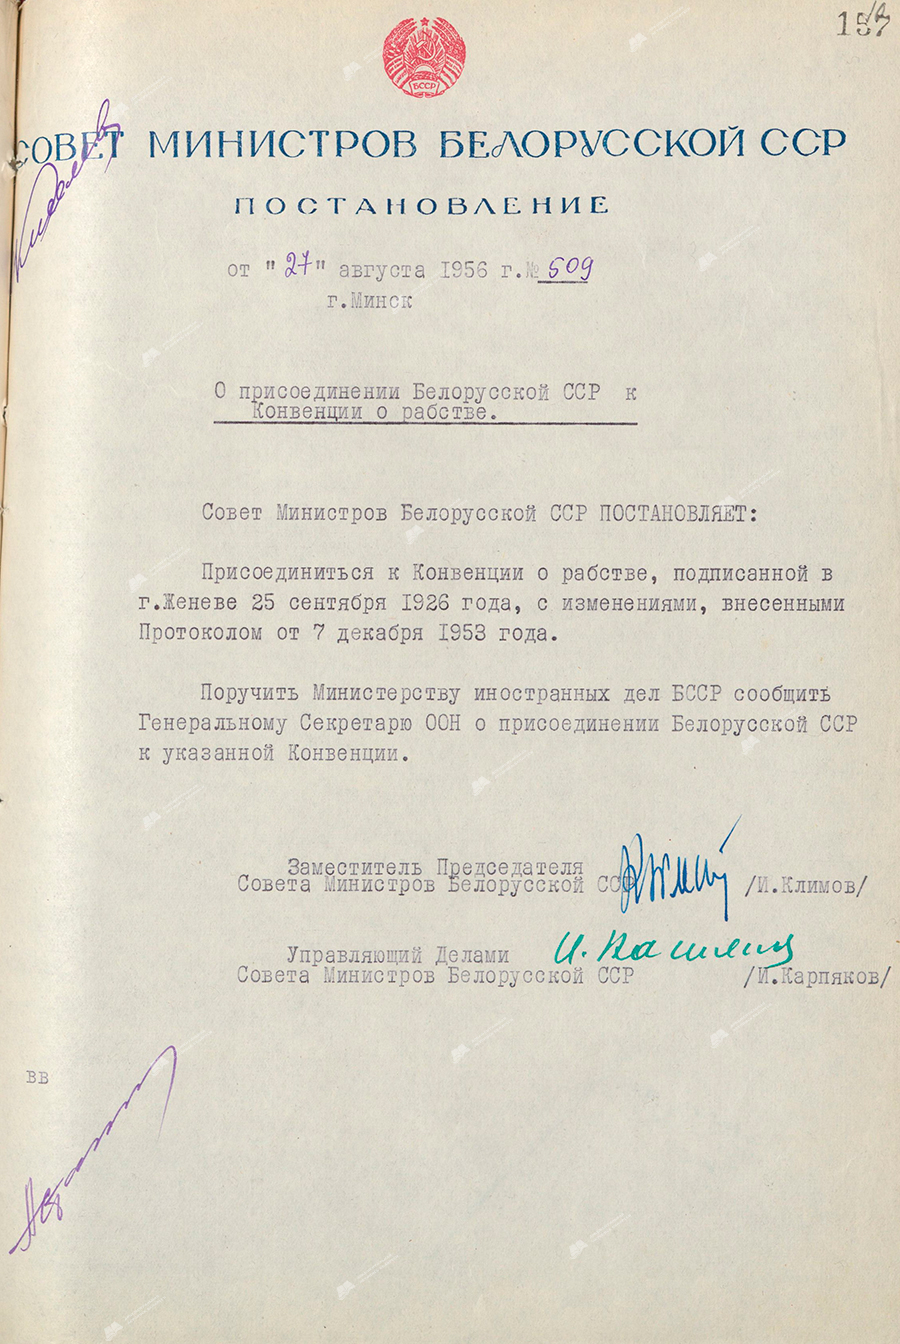 Resolution No. 509 of the Council of Ministers of the Byelorussian SSR «On the accession of the Byelorussian SSR to the Slavery Convention»-с. 0